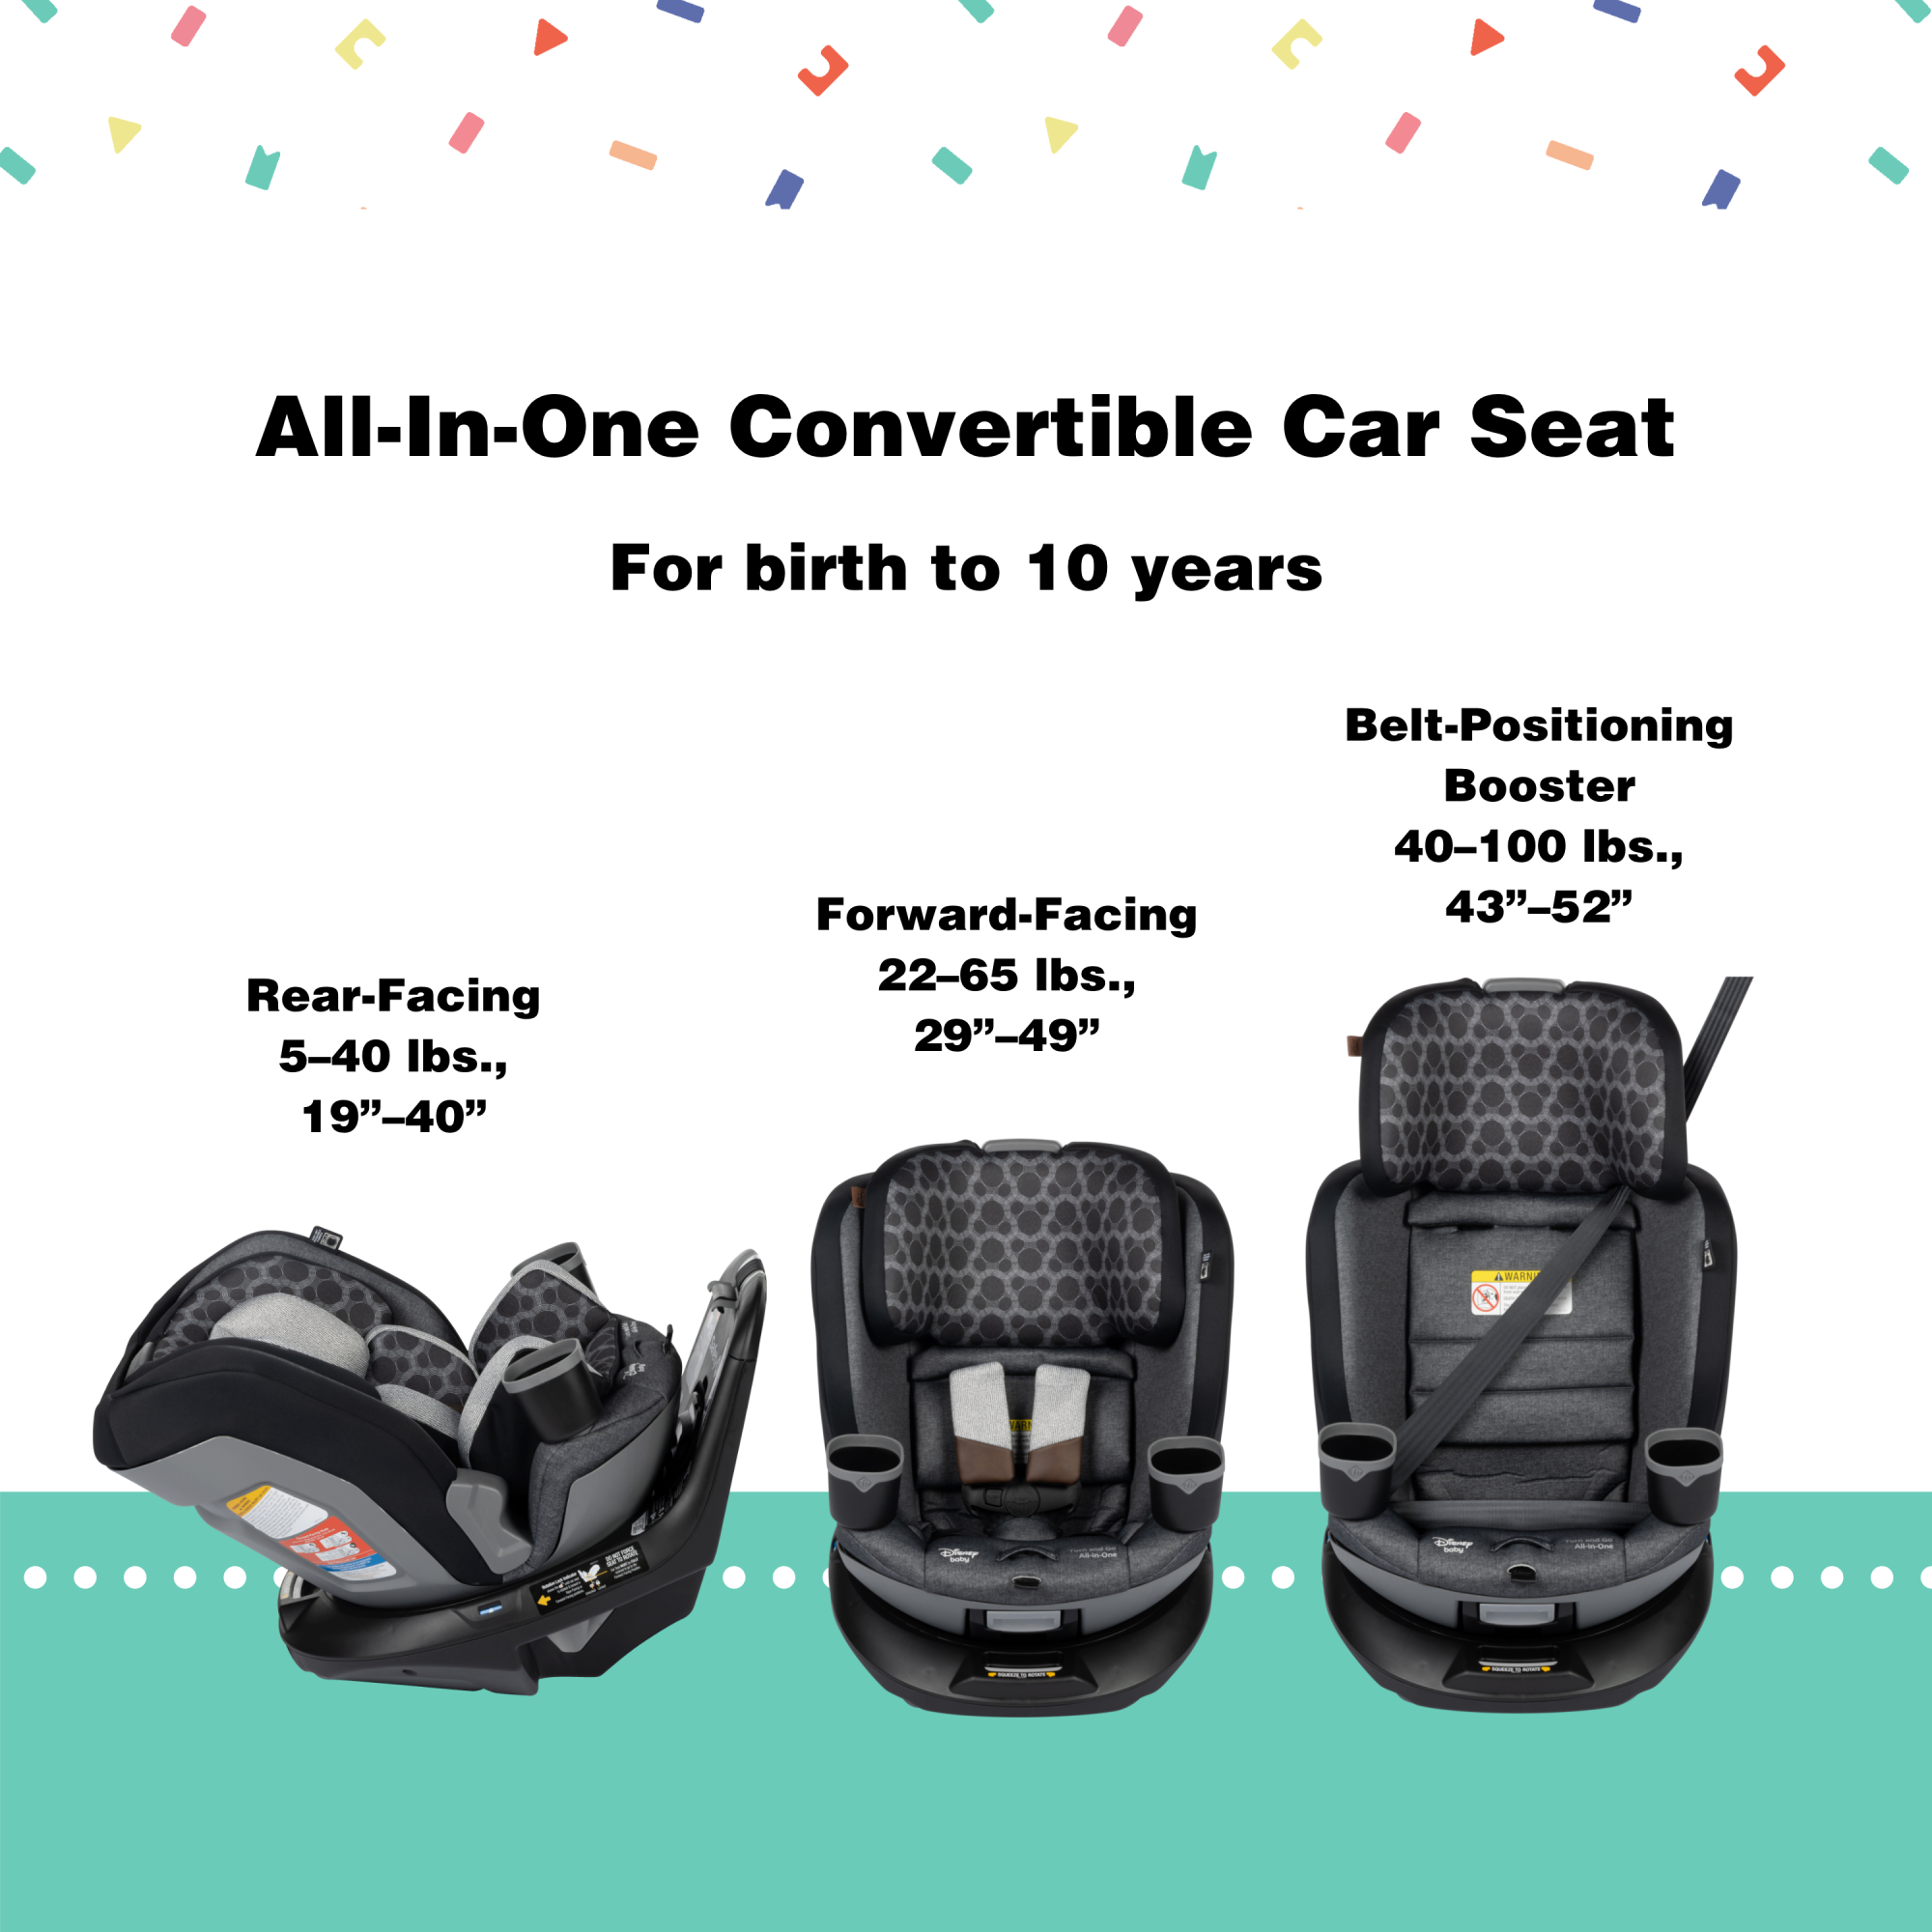 Disney Baby Turn and Go 360 Rotating All-in-One Convertible Car Seat - 10-position headrest and harness adjustment for all growth stages